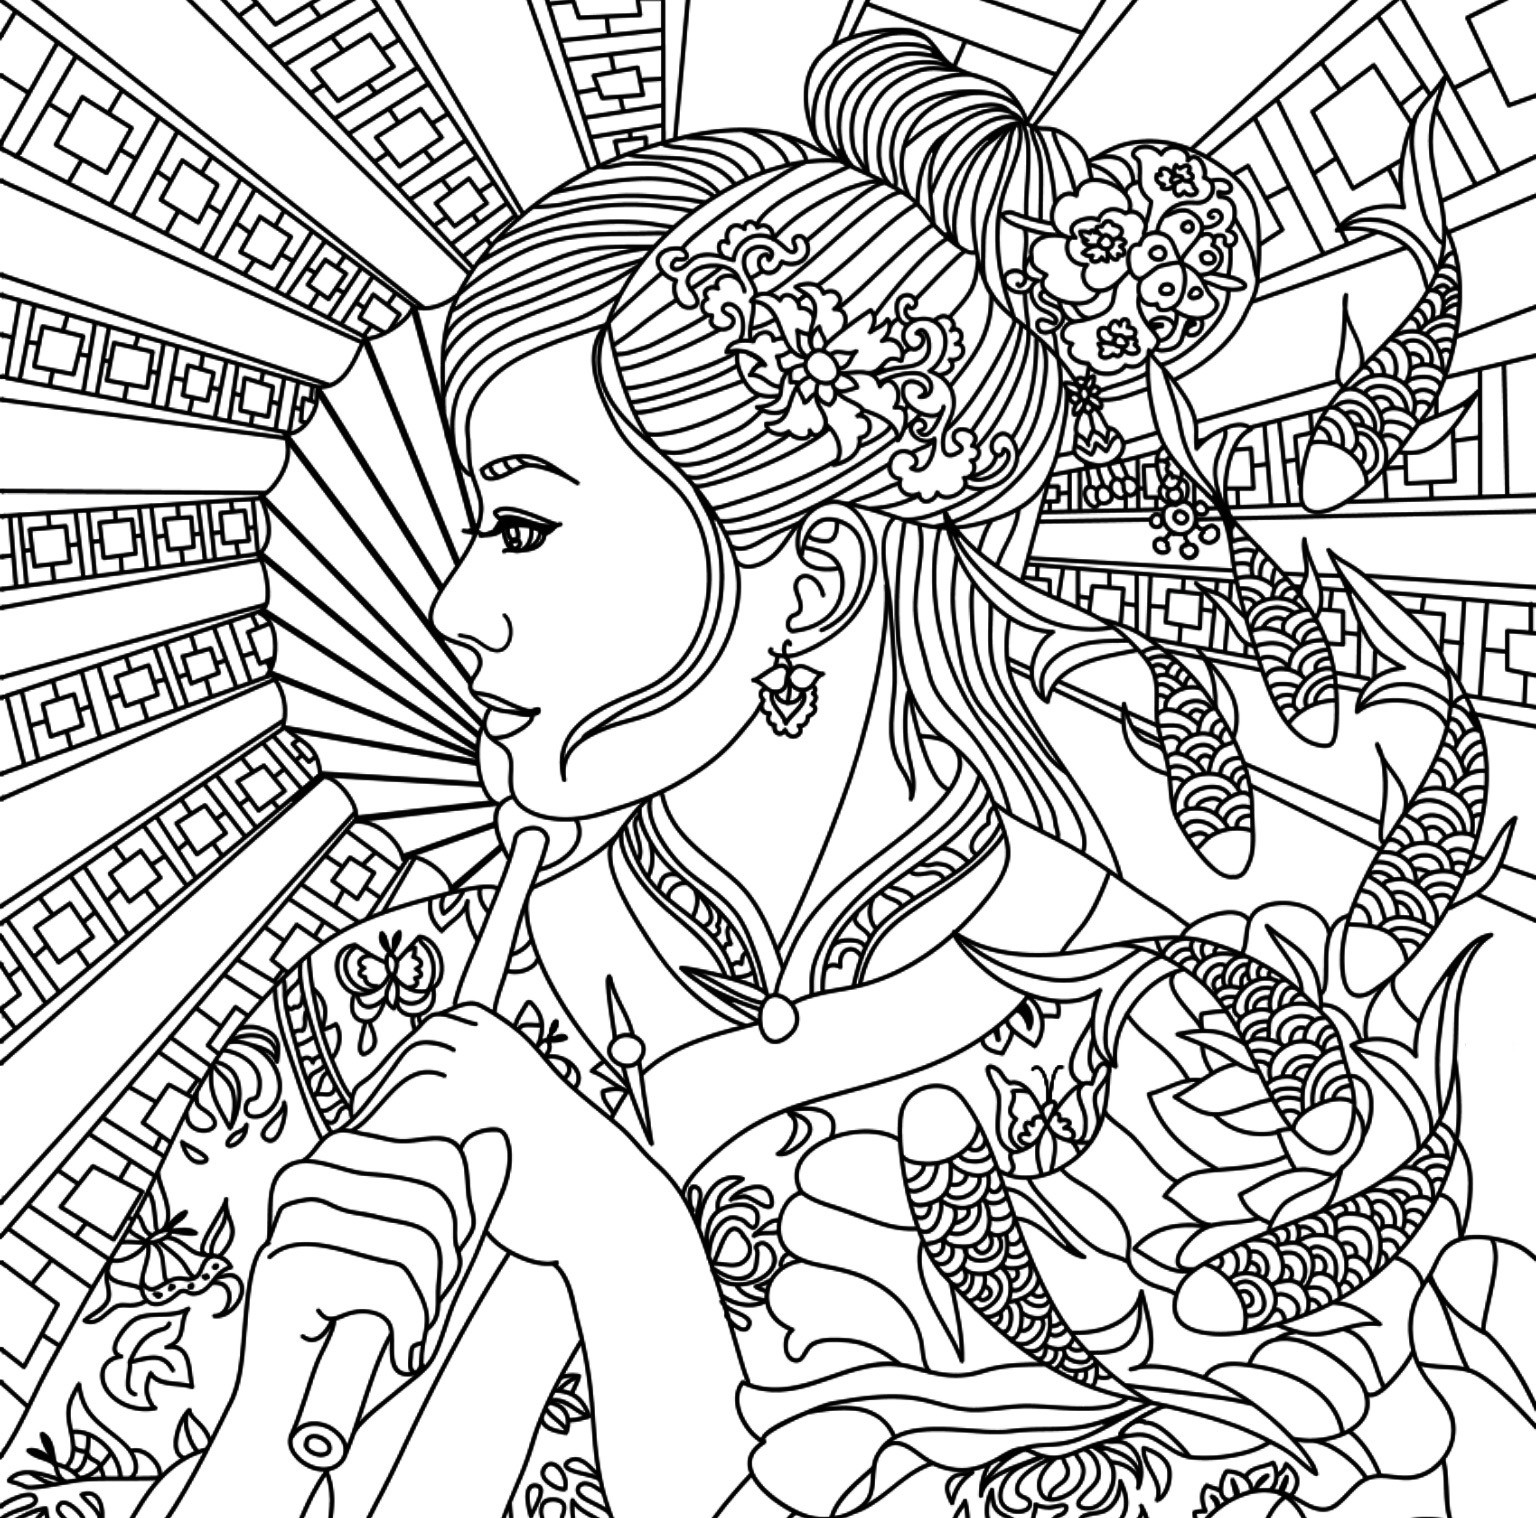 Horror Coloring Pages For Adults
 Horror Coloring Pages for Adults Gallery Free Coloring Books